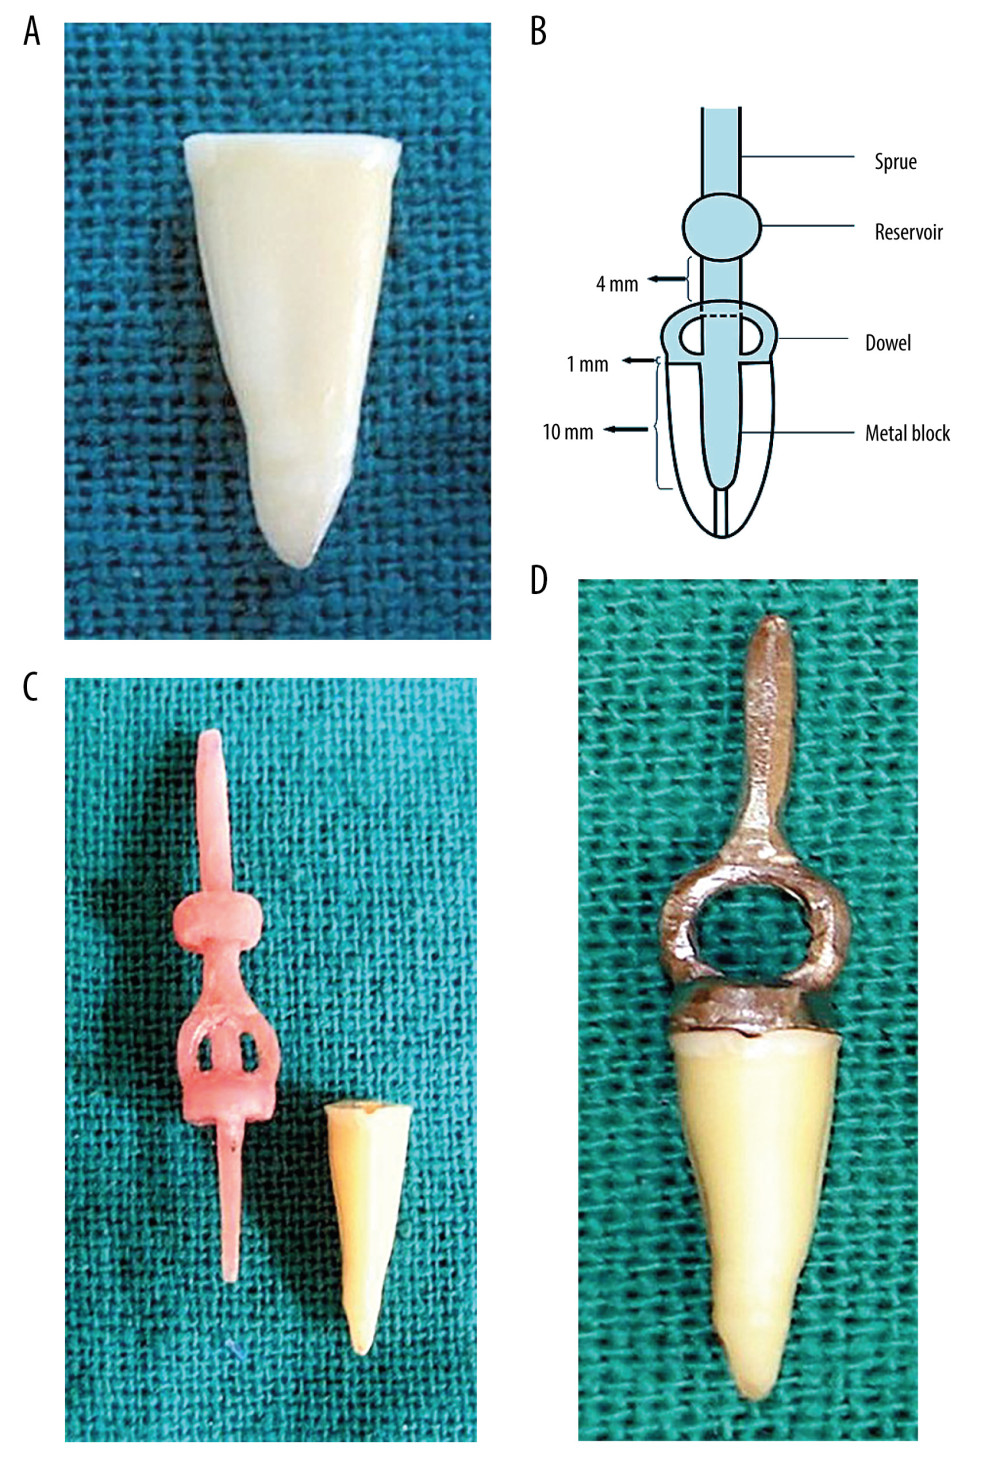 (A) Extracted mandibular second premolar after decoronation. (B) Schematic diagram showing the design of the cast post core and its various dimensions relative to the length of the root. (C) Prepared pattern for cast post core against the back drop of its specimen. (D) Raw cast post core seated on the extracted tooth showing marginal adaptation. Photographs taken using digital single-lens reflex (DSLR) camera (Canon EOS 700D) with 100 mm macro lens) with/without ring flash. Figure created using MS PowerPoint, version 20H2 (OS build 19042,1466), Windows 11 Pro, Microsoft corporation).